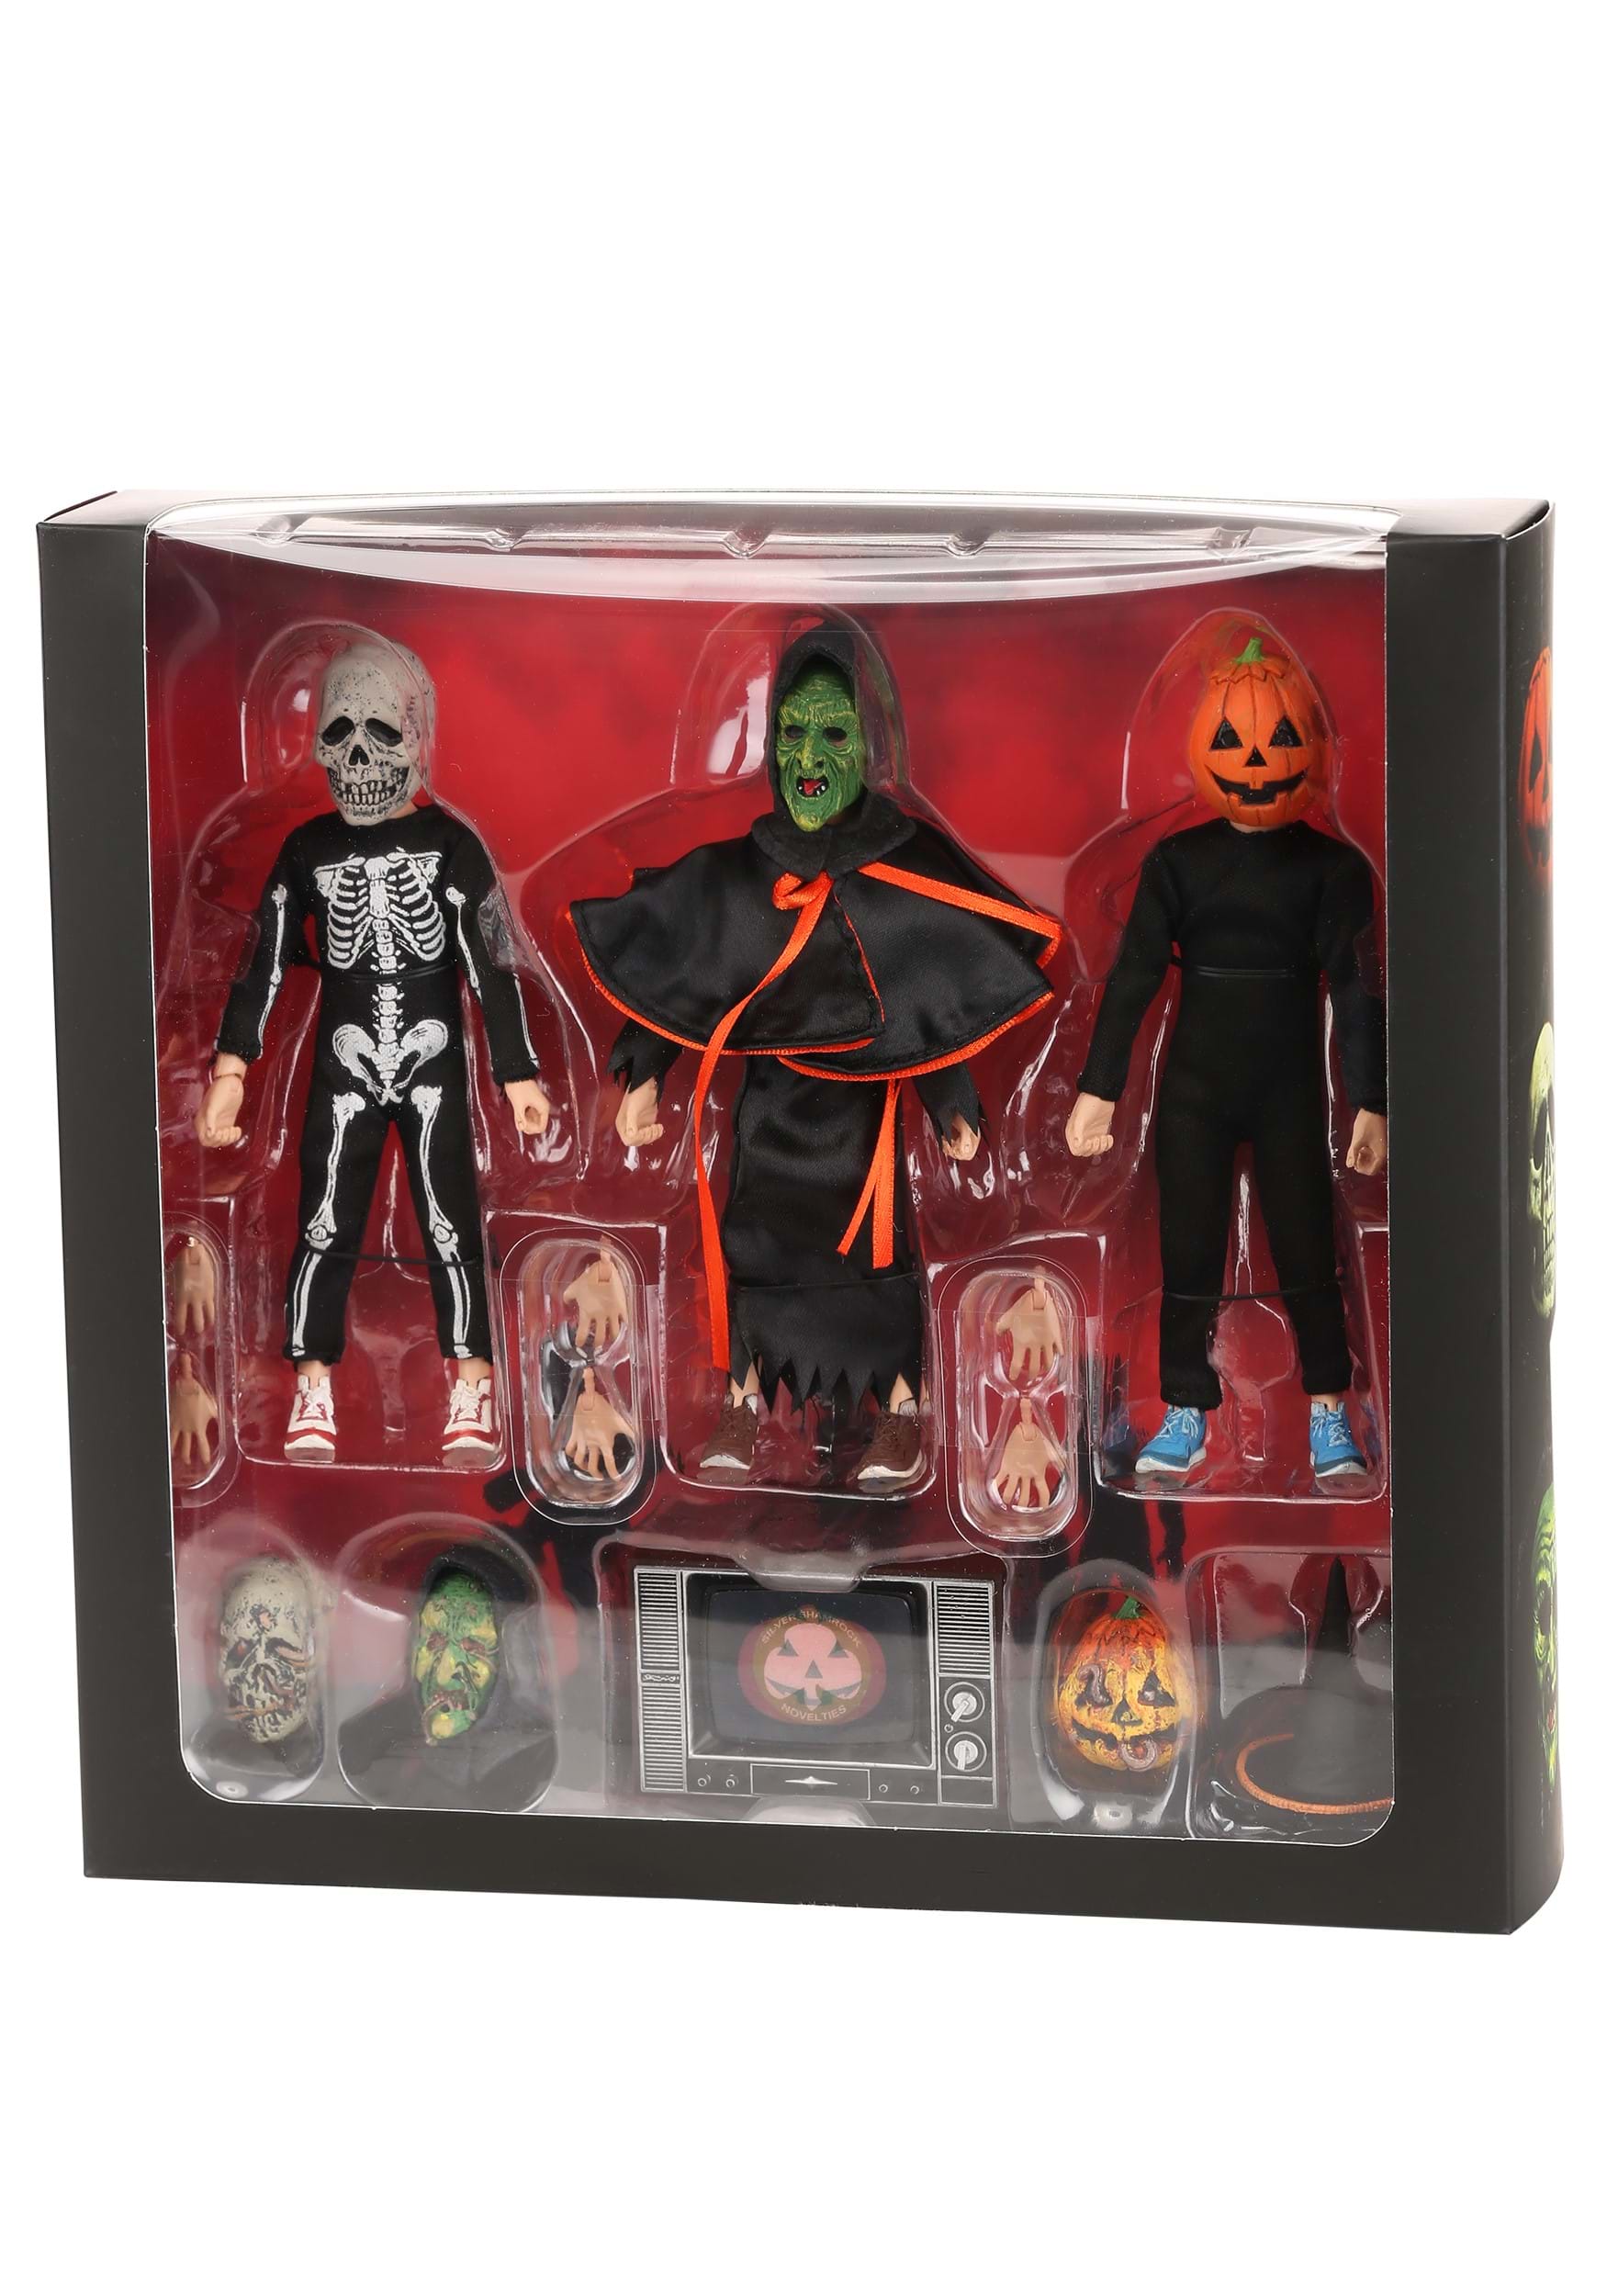 Halloween 3 - Season of the Witch 3 Pack 8-Inch Scale Figure Set